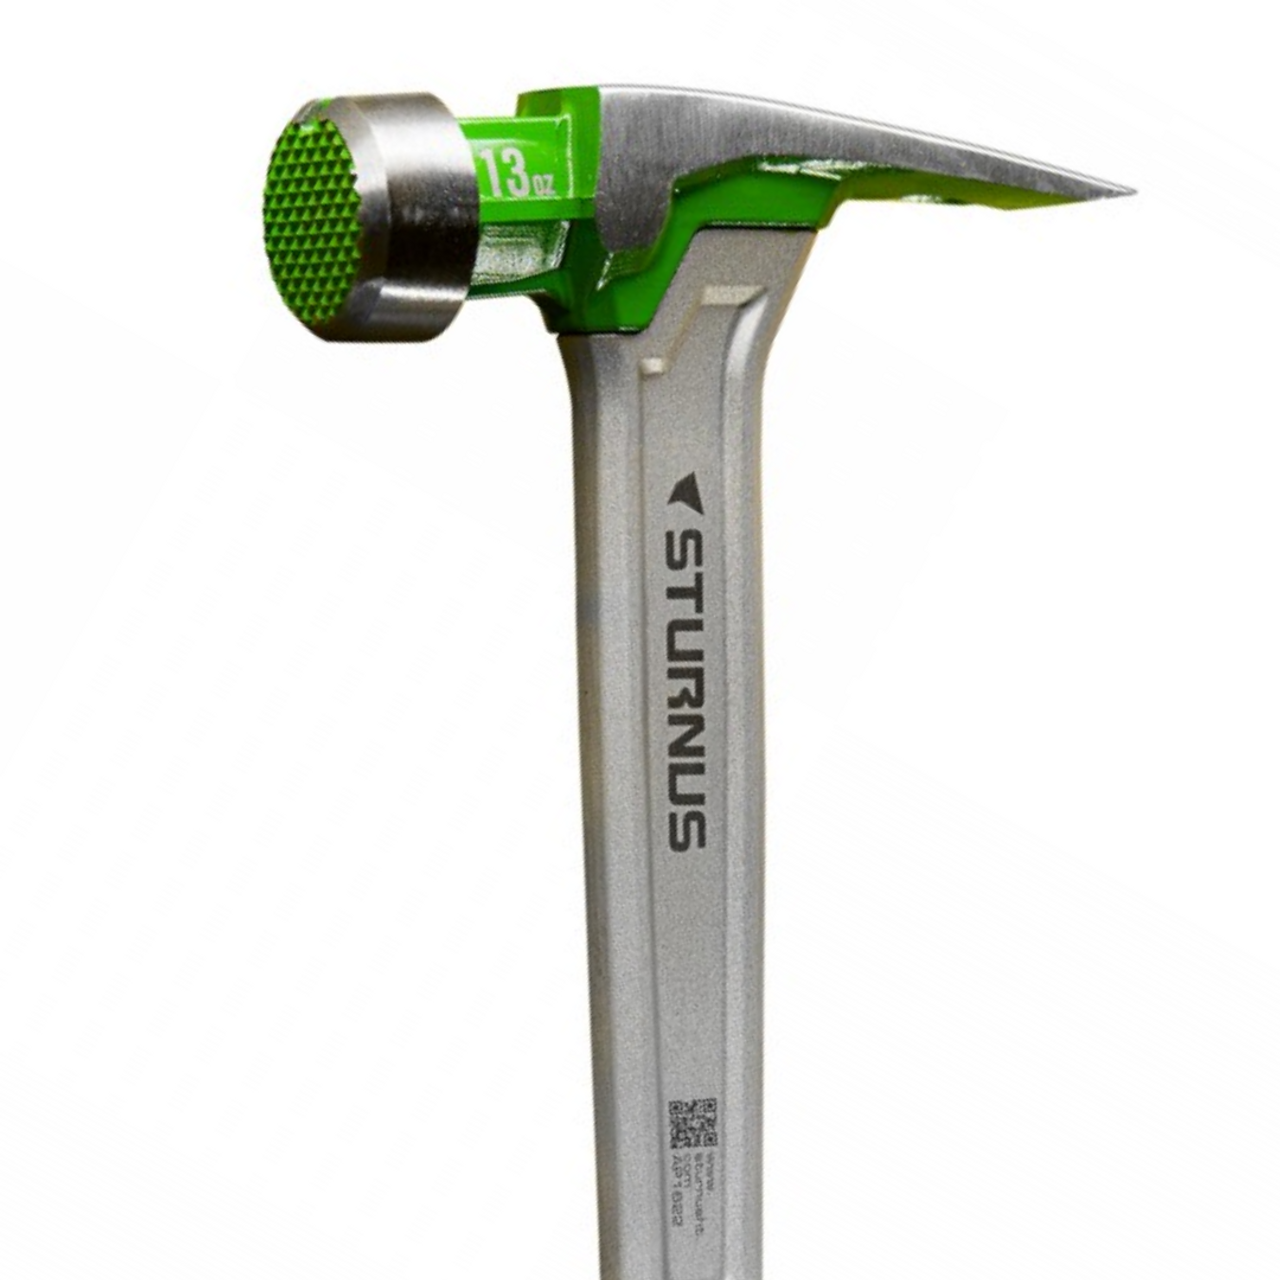 STURNUS Hammer | VELOCITY Milled Face Green Hammer 13oz with Long Handle